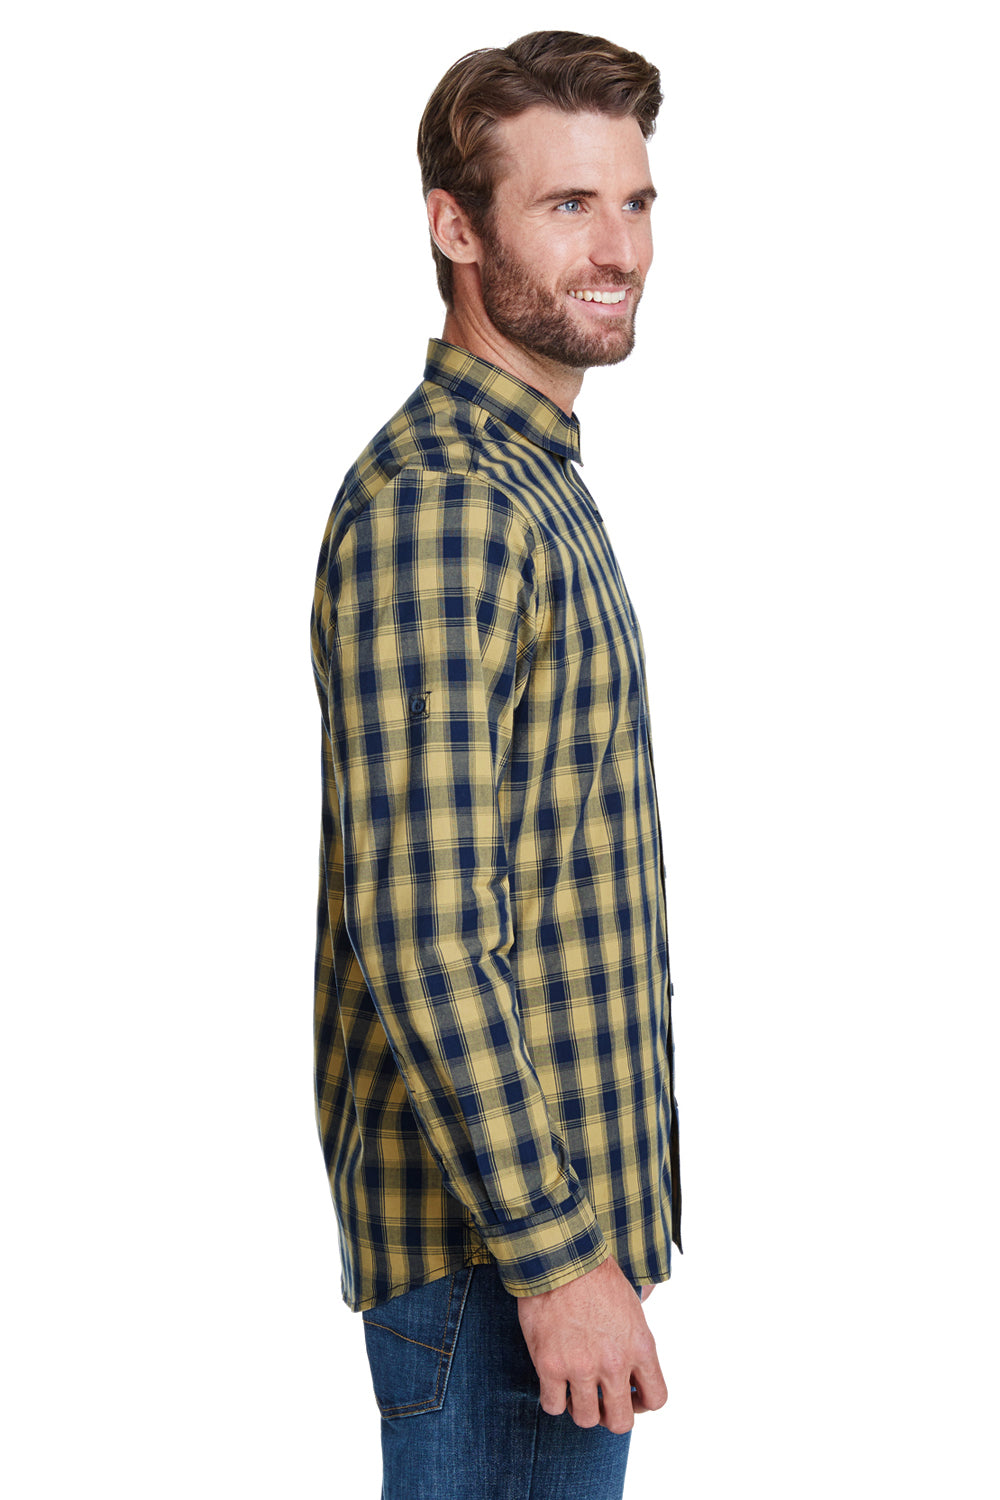 Artisan Collection RP250 Mens Mulligan Check Long Sleeve Button Down Shirt Camel Brown/Navy Blue Model Side